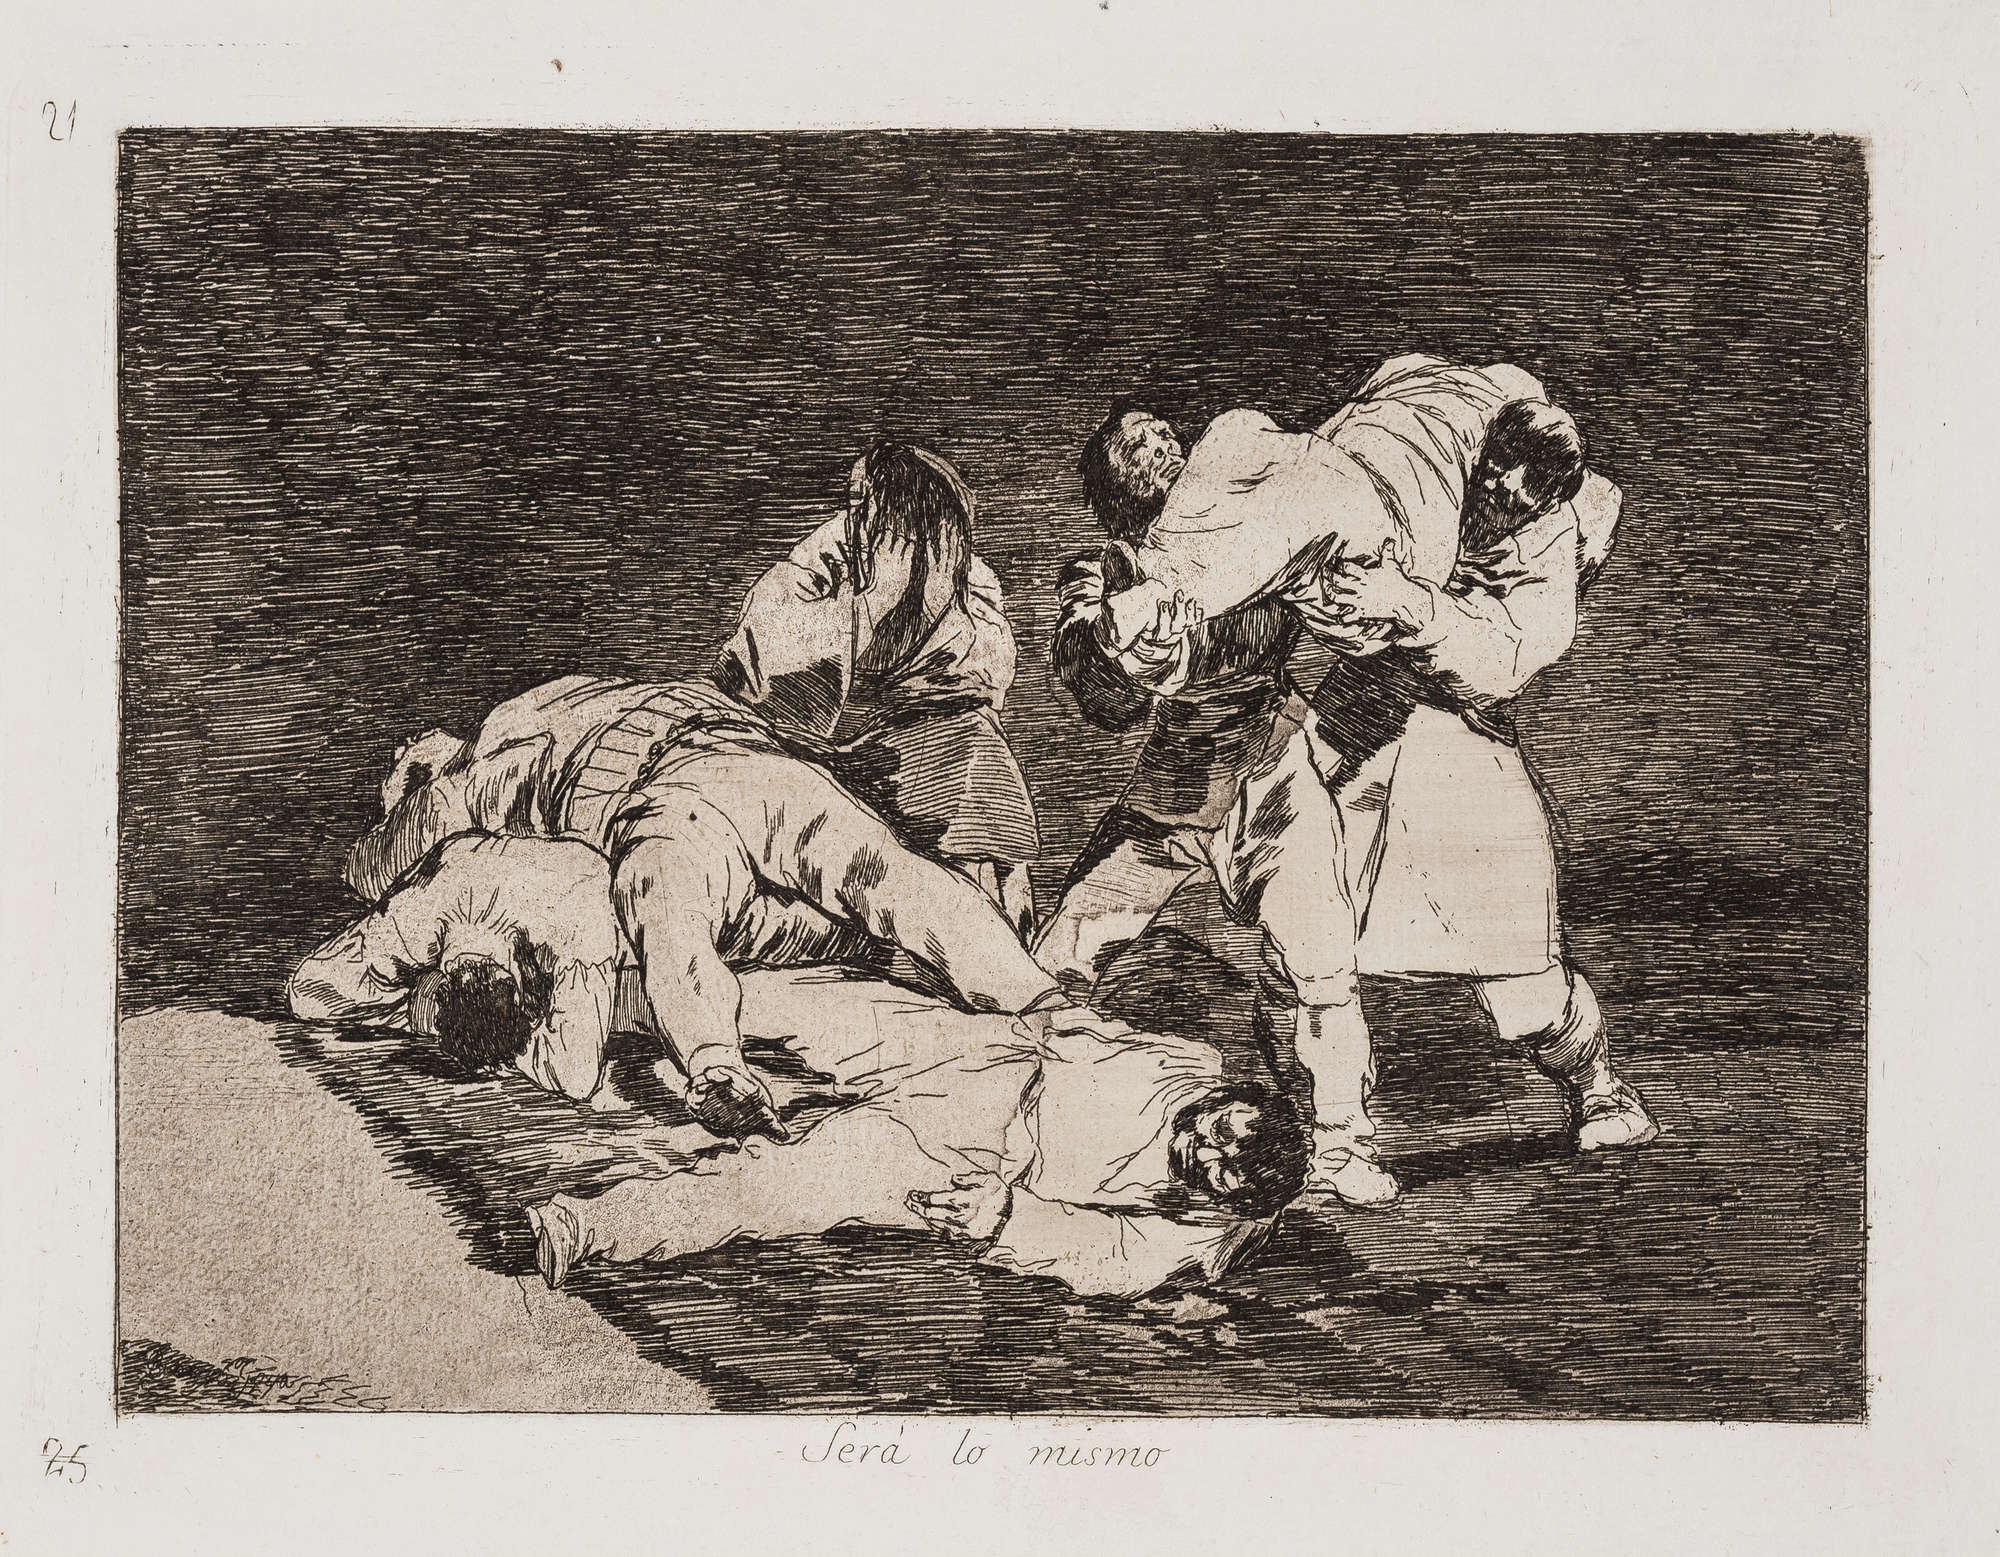 Artwork by Francisco José de Goya y Lucientes, Three plates from 'The Disasters of War', Made of etchings and aquatint